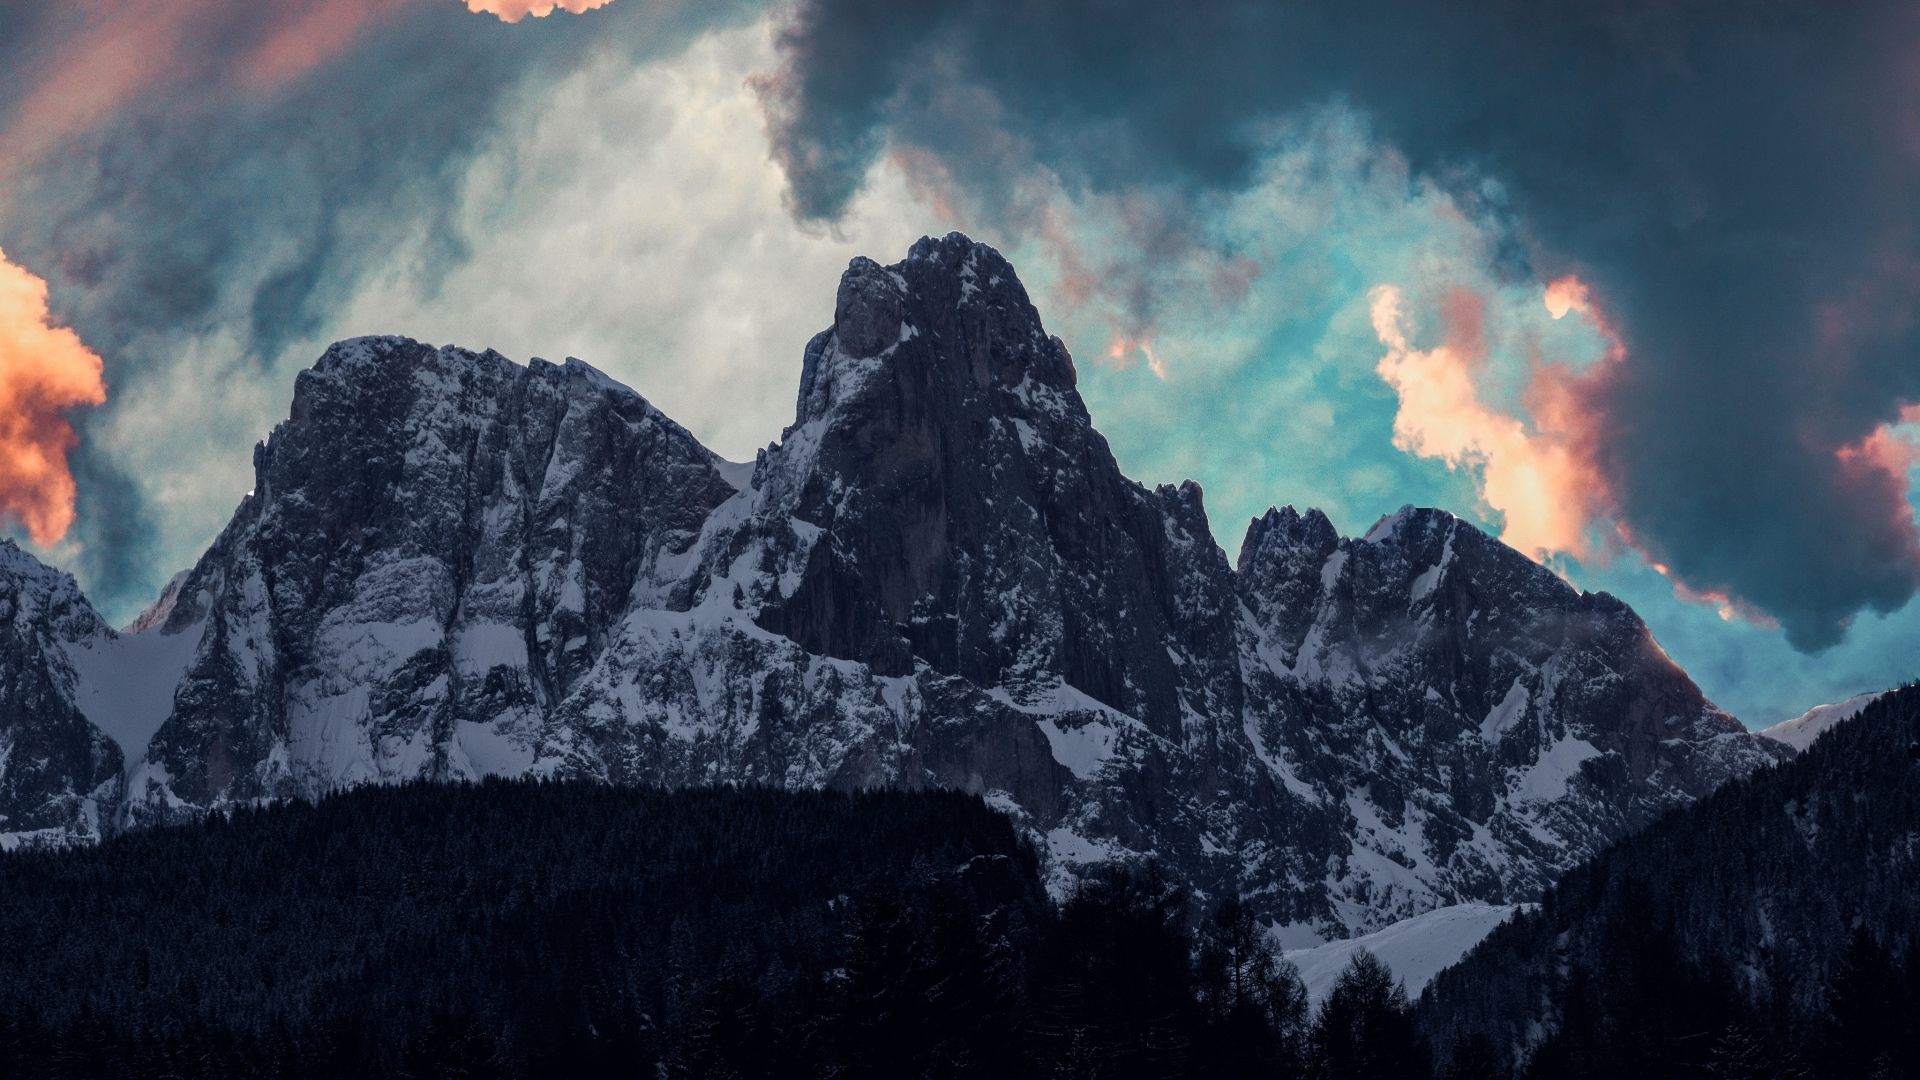 Download Wallpaper 1920x1080 Mountains Clouds Trees Snow Full